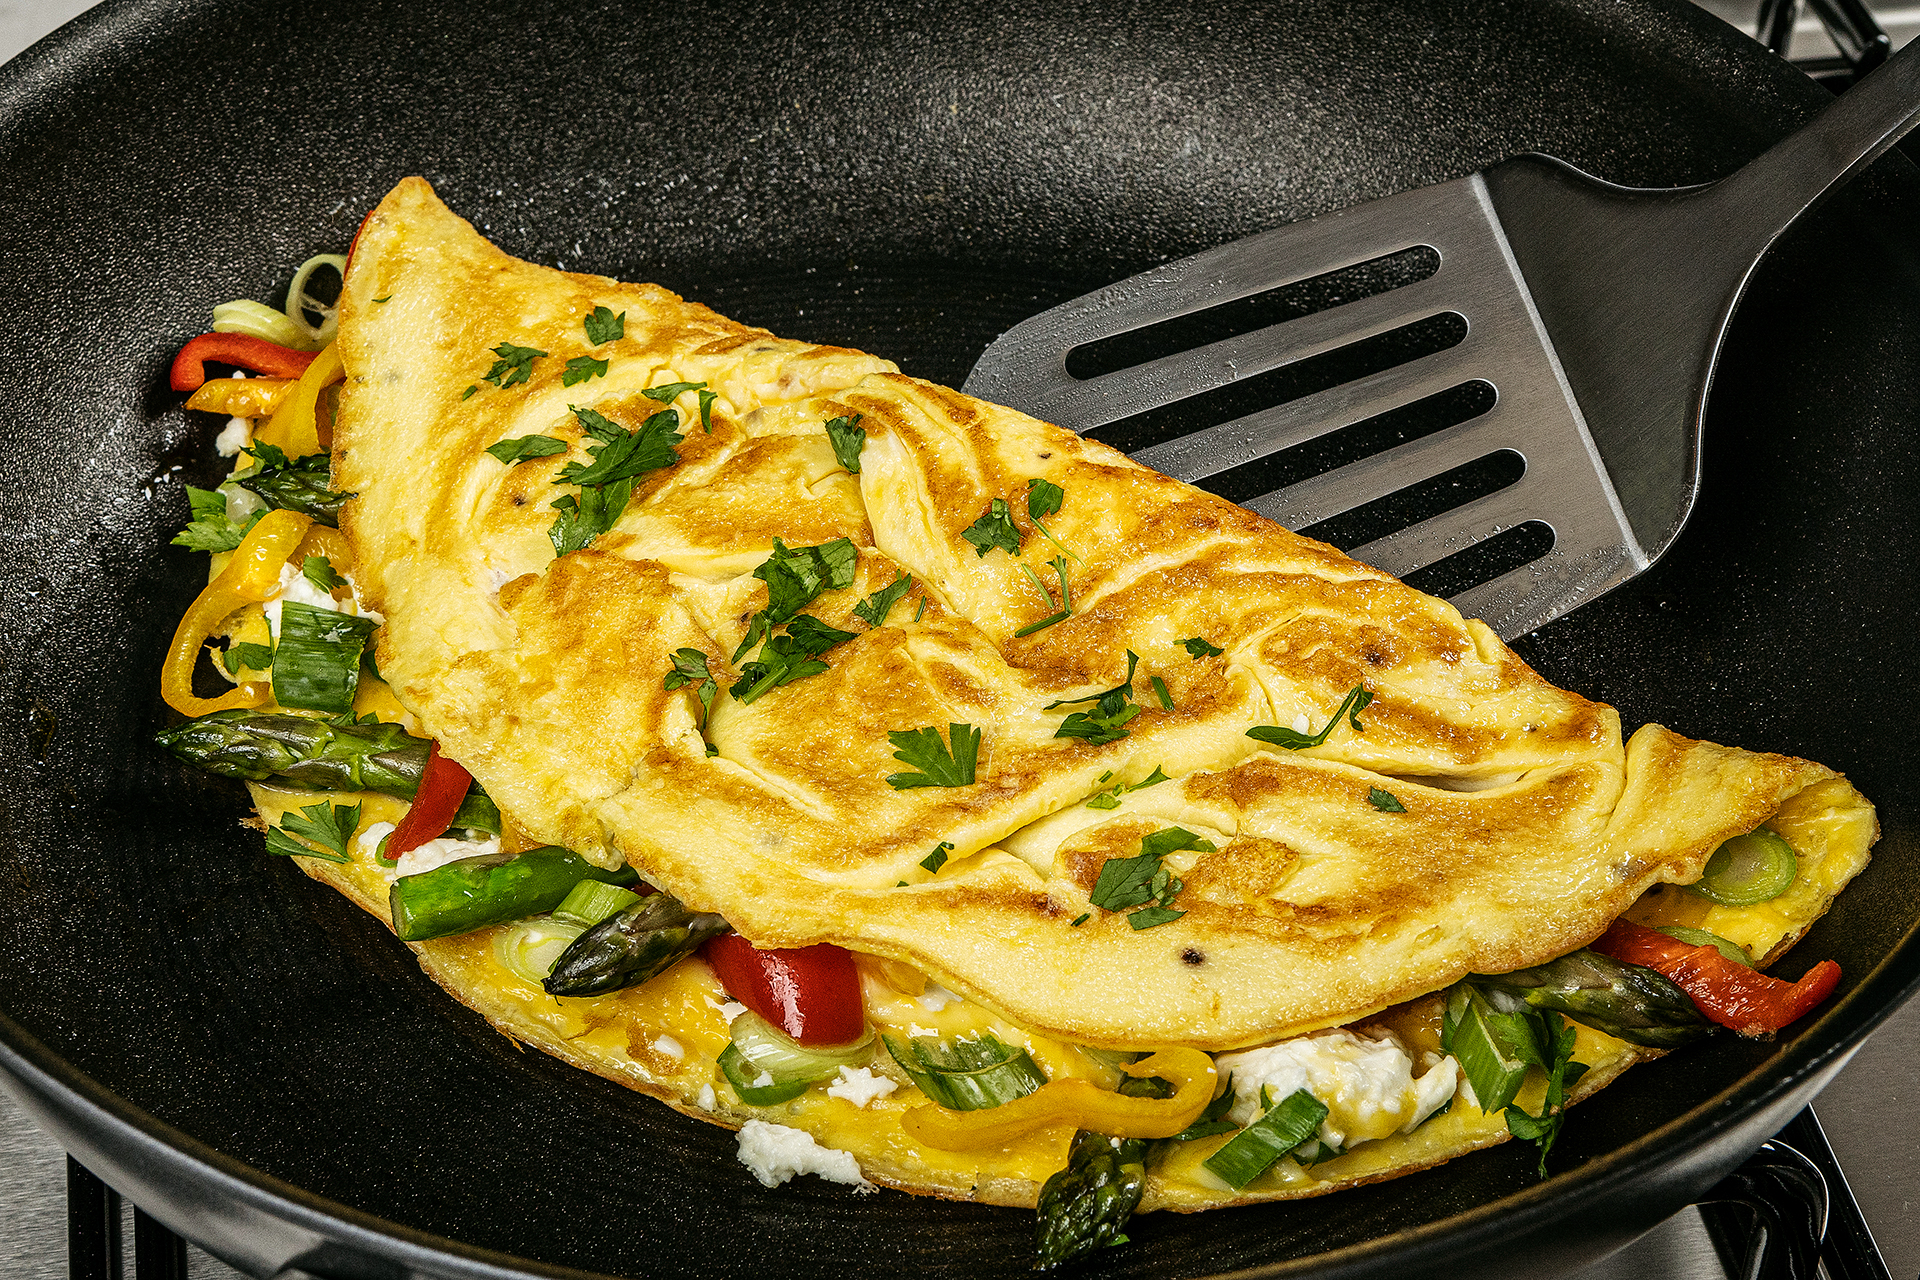 Food photography of an omelette being cooked in a Circulon pan